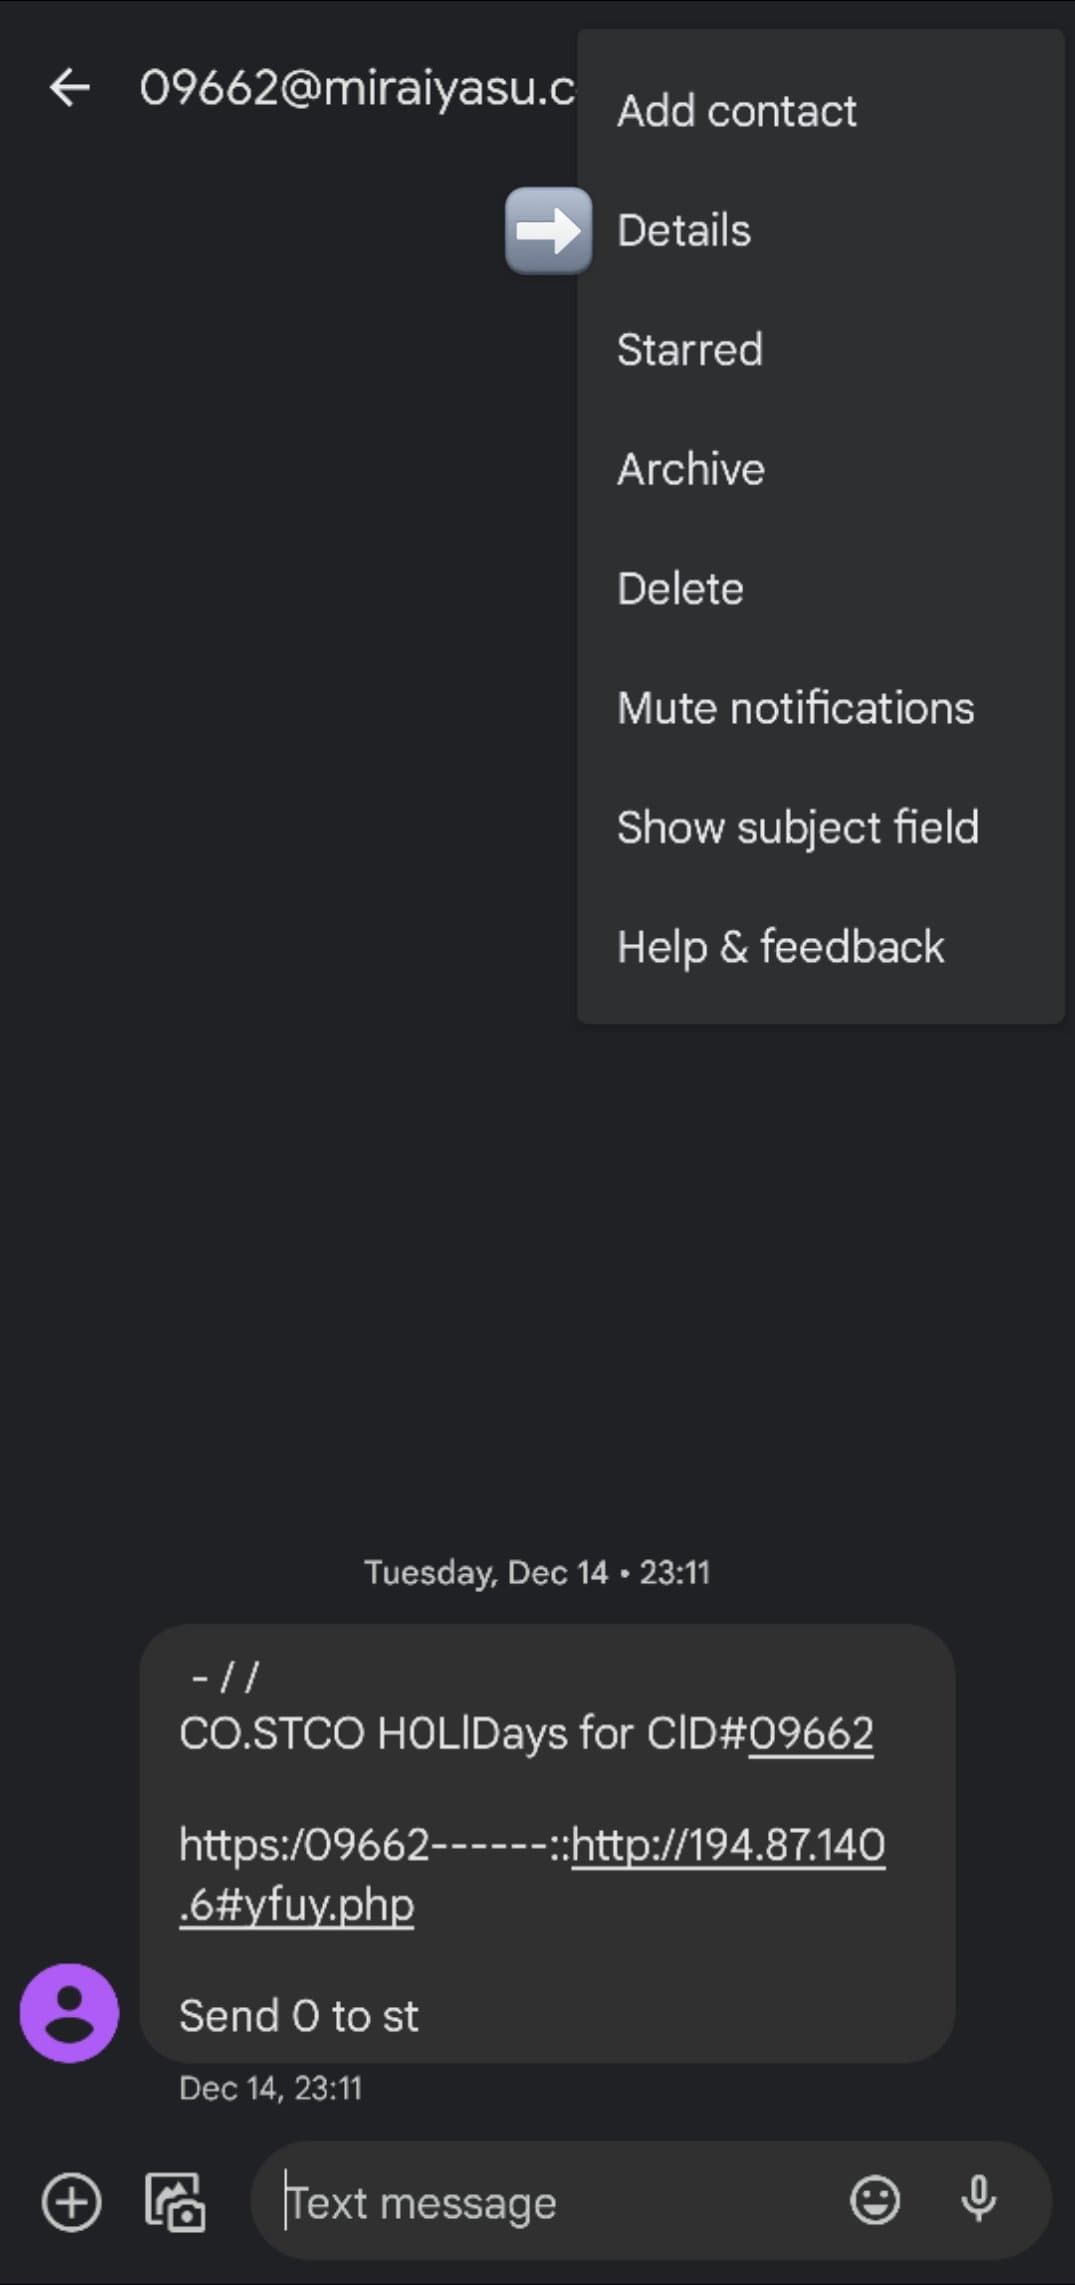 Image shows a spam text conversation with the options drop down menu displayed in the top right.